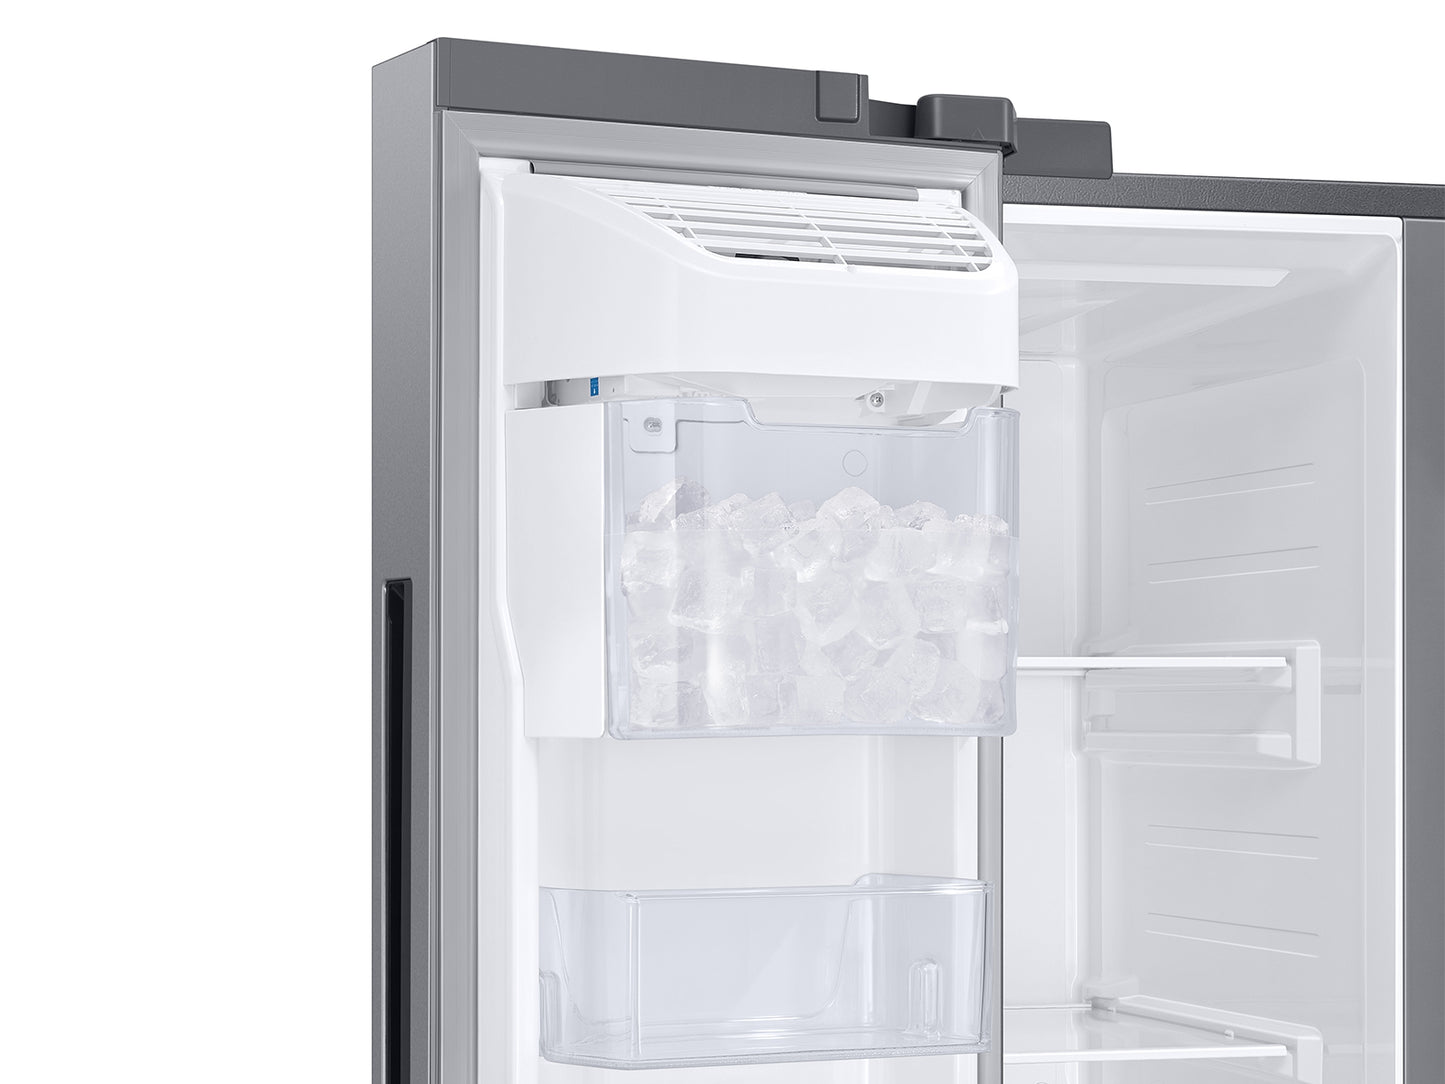 Samsung 28 cu. ft. Smart Side-by-Side Refrigerator in Stainless Steel